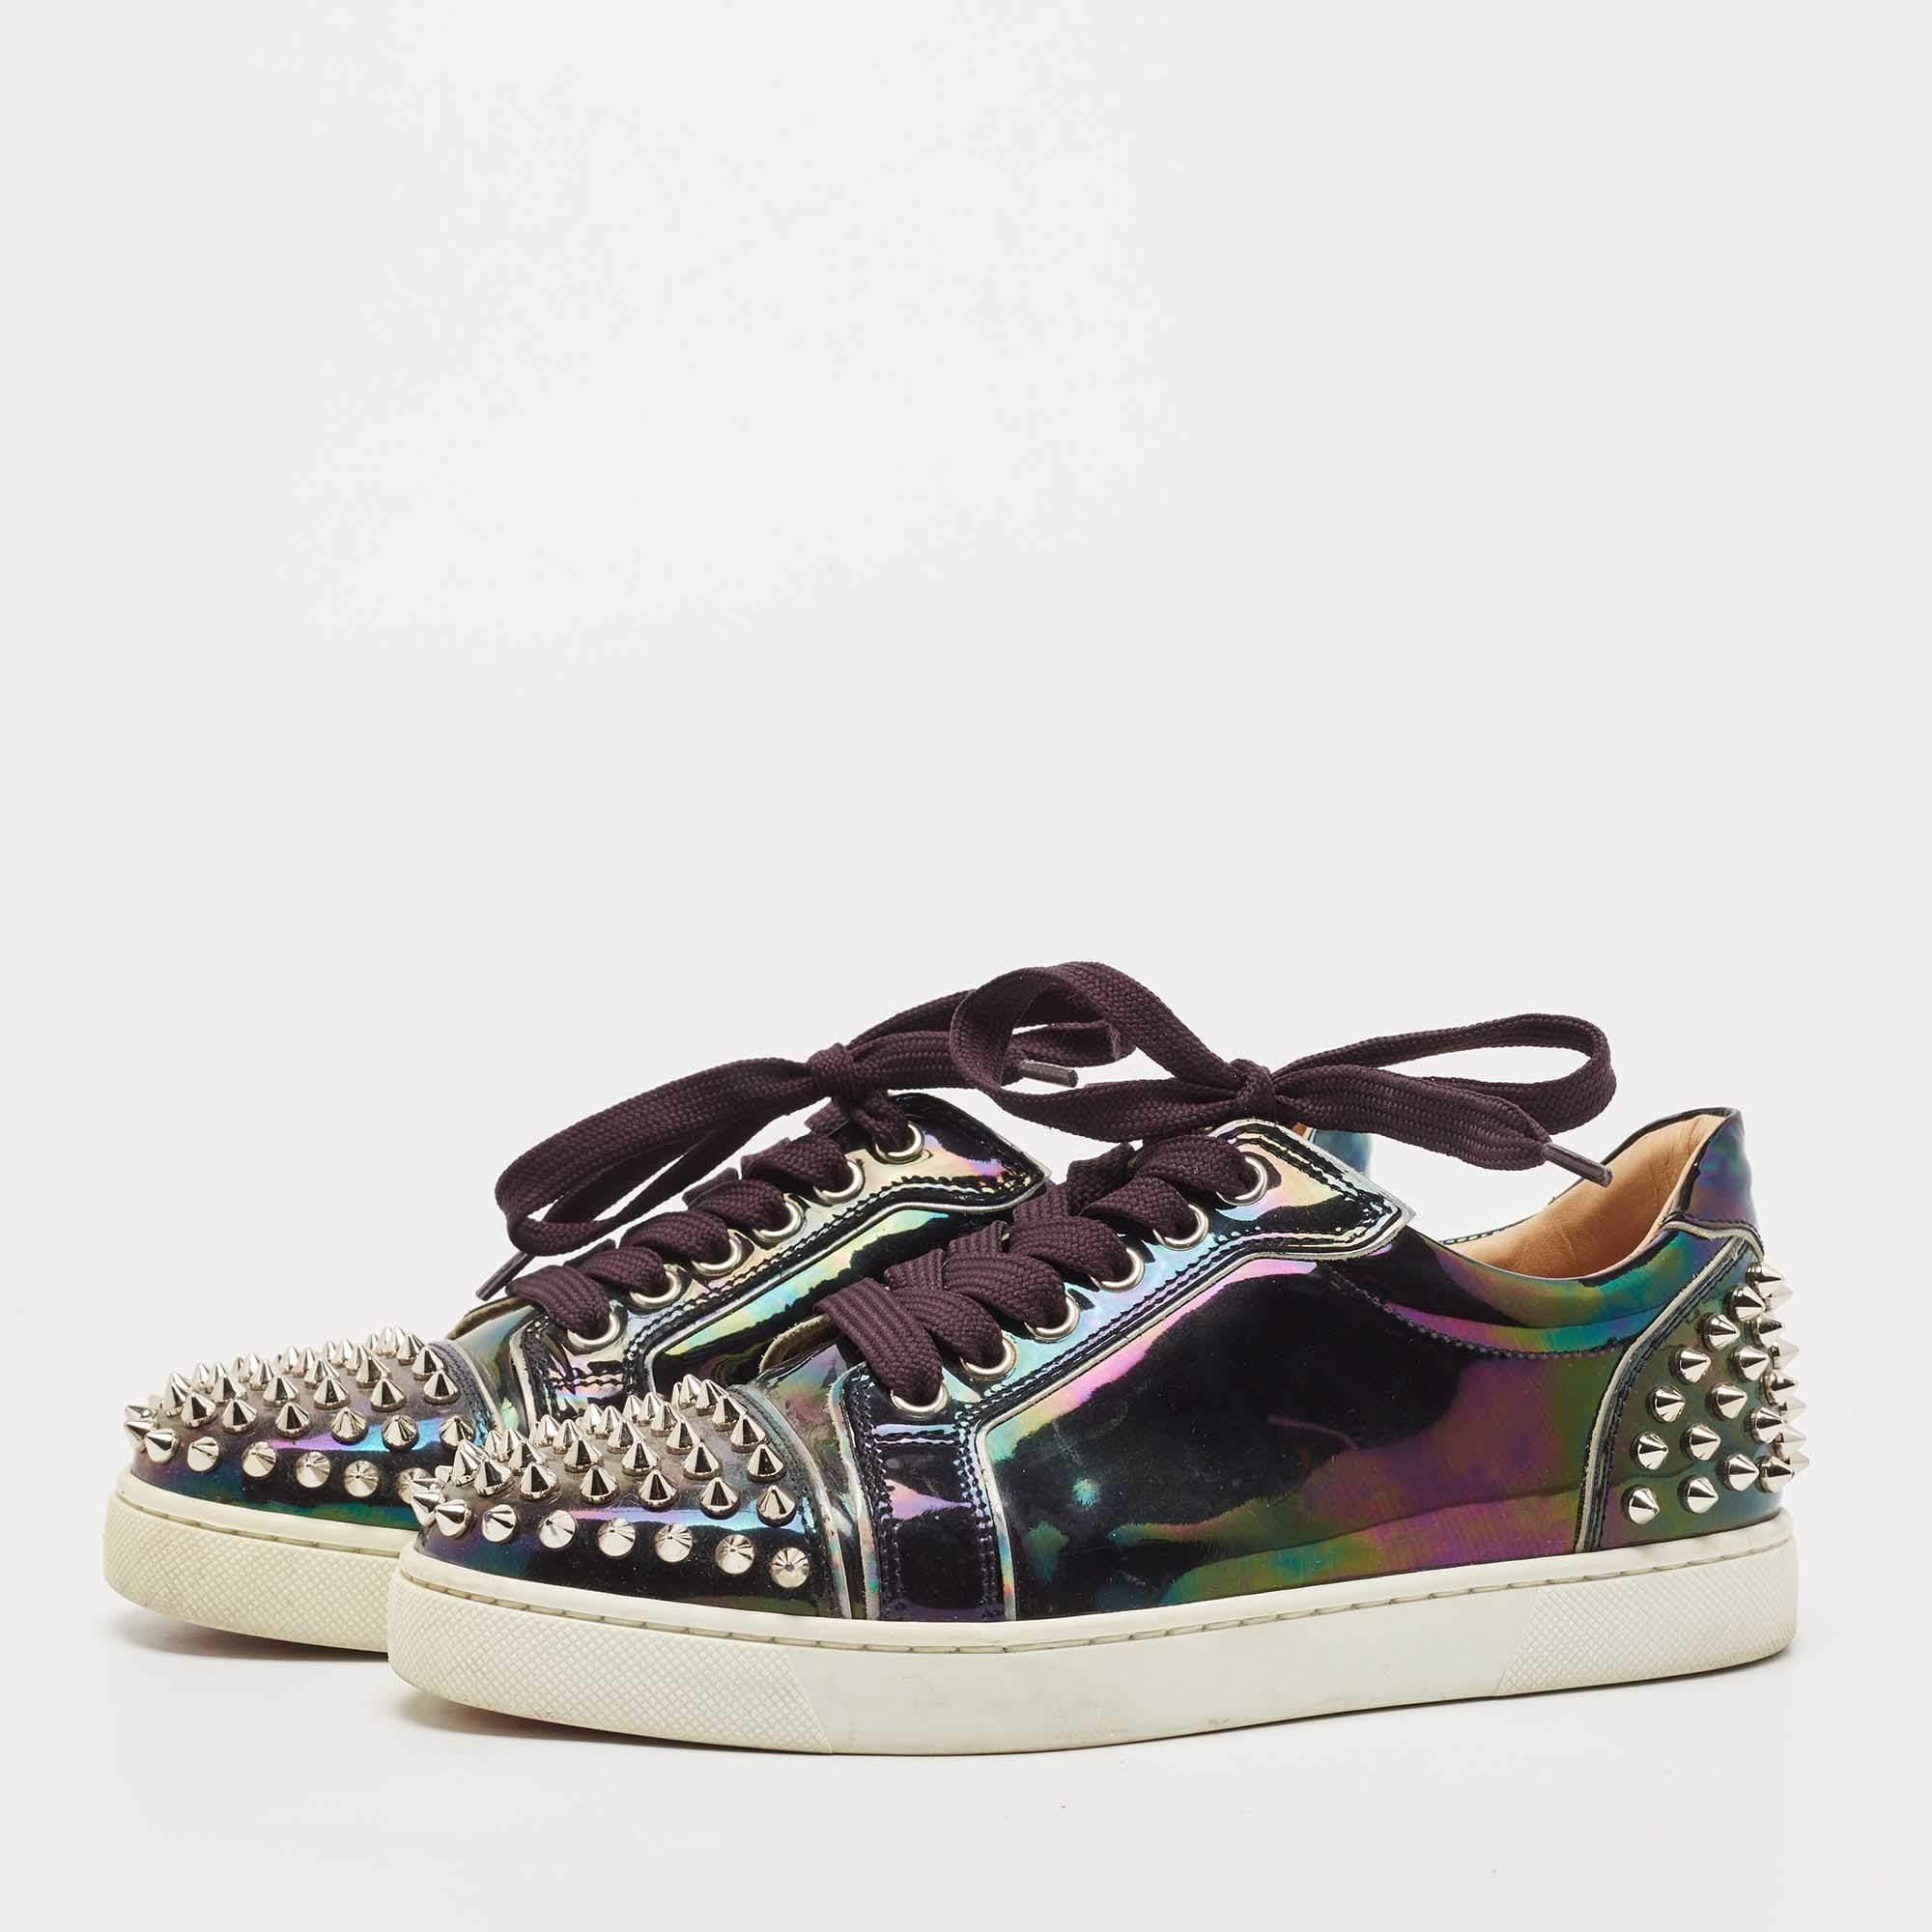 Christian Louboutin Holographic Patent veira Spike Low Top Sneakers Size 36.5 In Good Condition In Dubai, Al Qouz 2